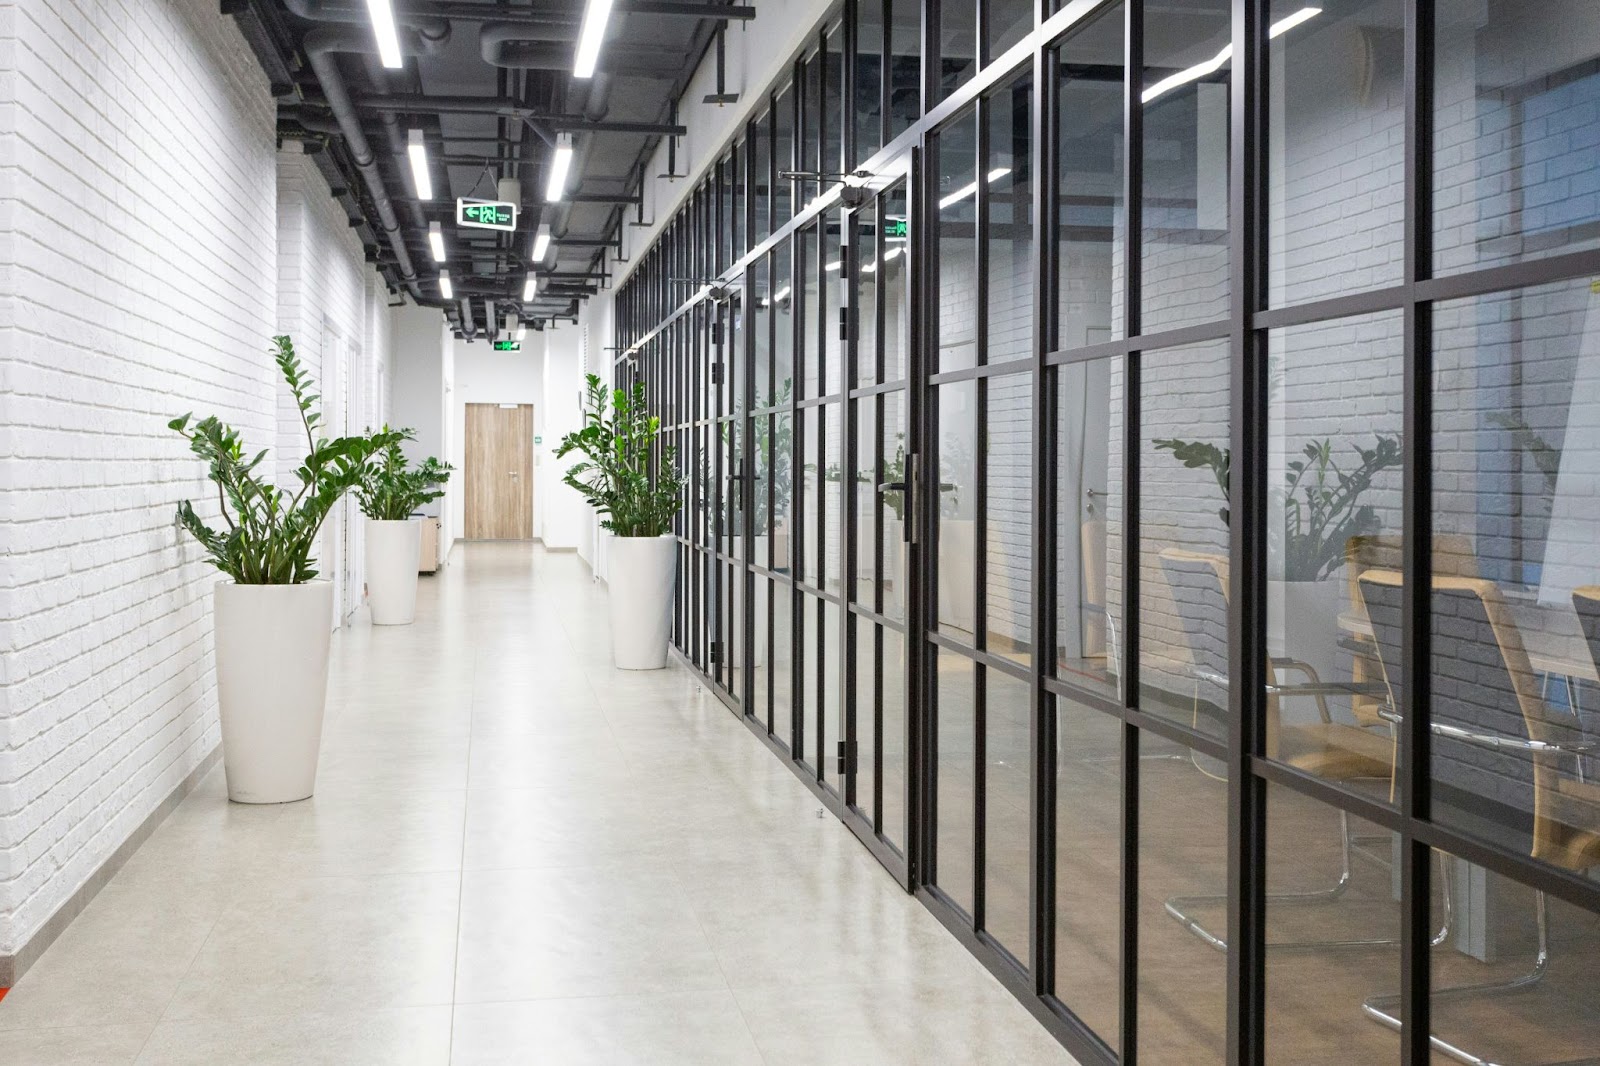 Modern office space with plants in white pots